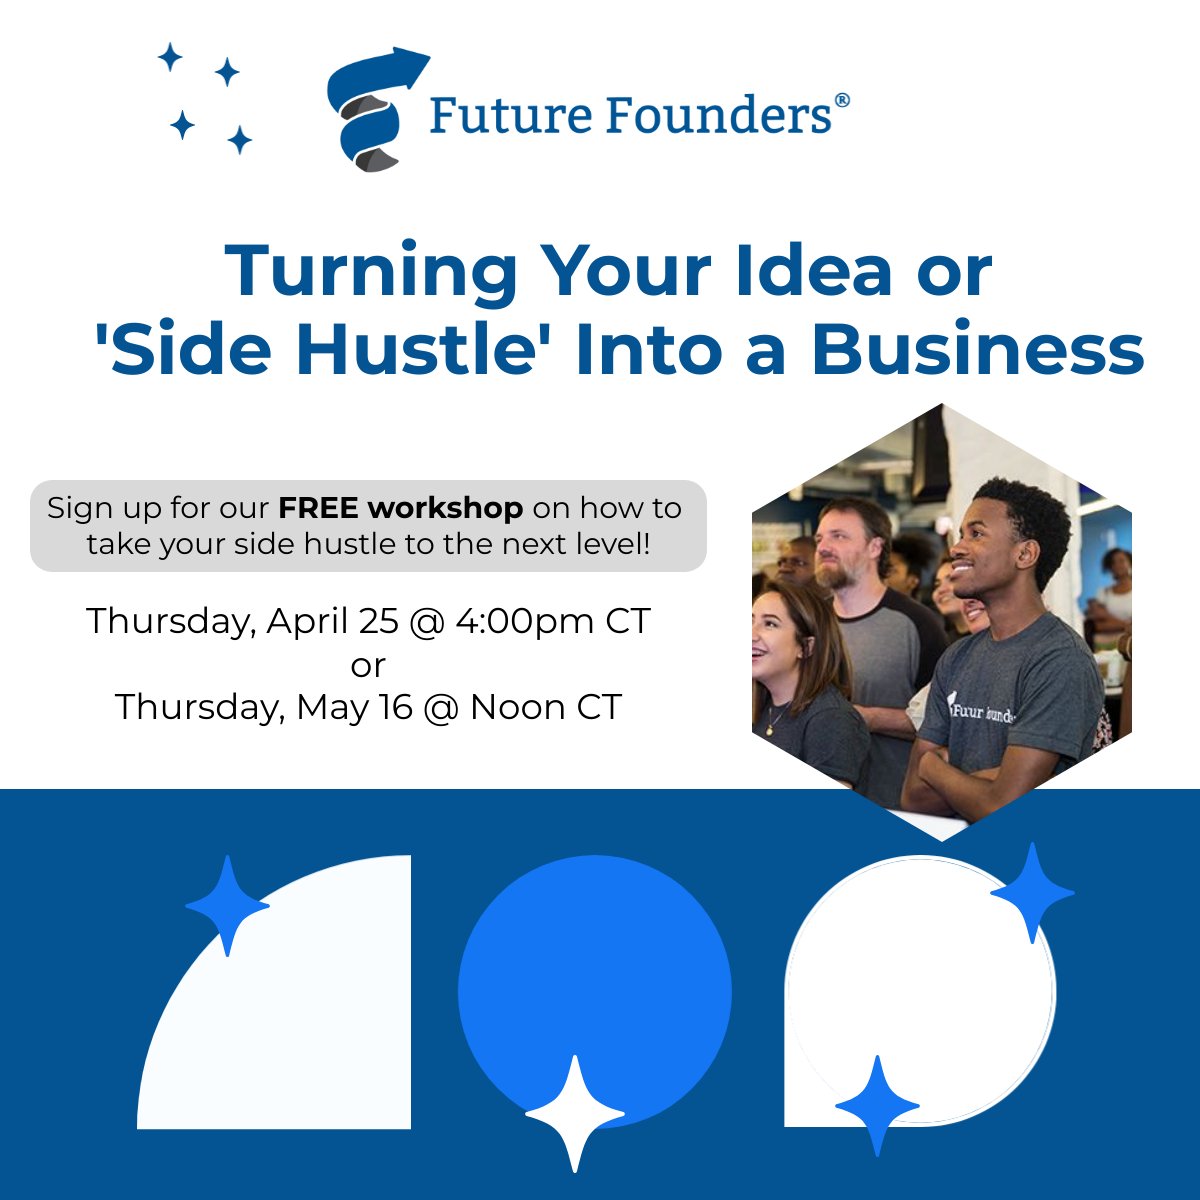 Looking to take your business idea or side hustle to the next level? Join us THIS THURSDAY at 4:00 PM CT for a free virtual workshop developed to help young entrepreneurs (18-30) take the necessary steps to launch and grow their businesses. ow.ly/YoXZ50Rlkss